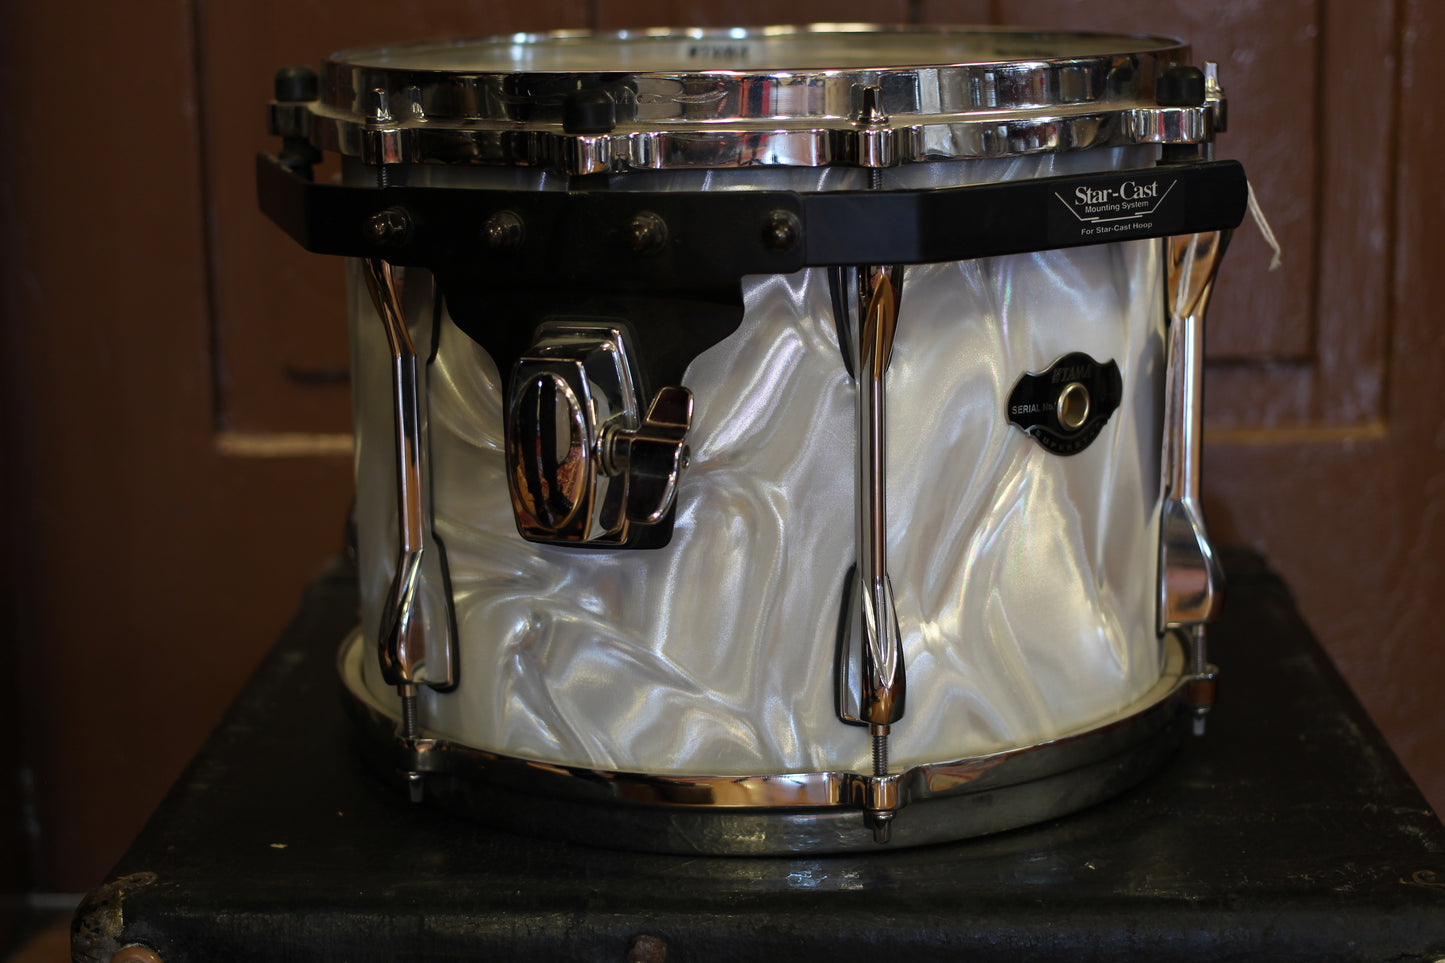 Used Tama Superstar Hyperdrive Kit in White Satin Flame 18x22 16x16 9x12